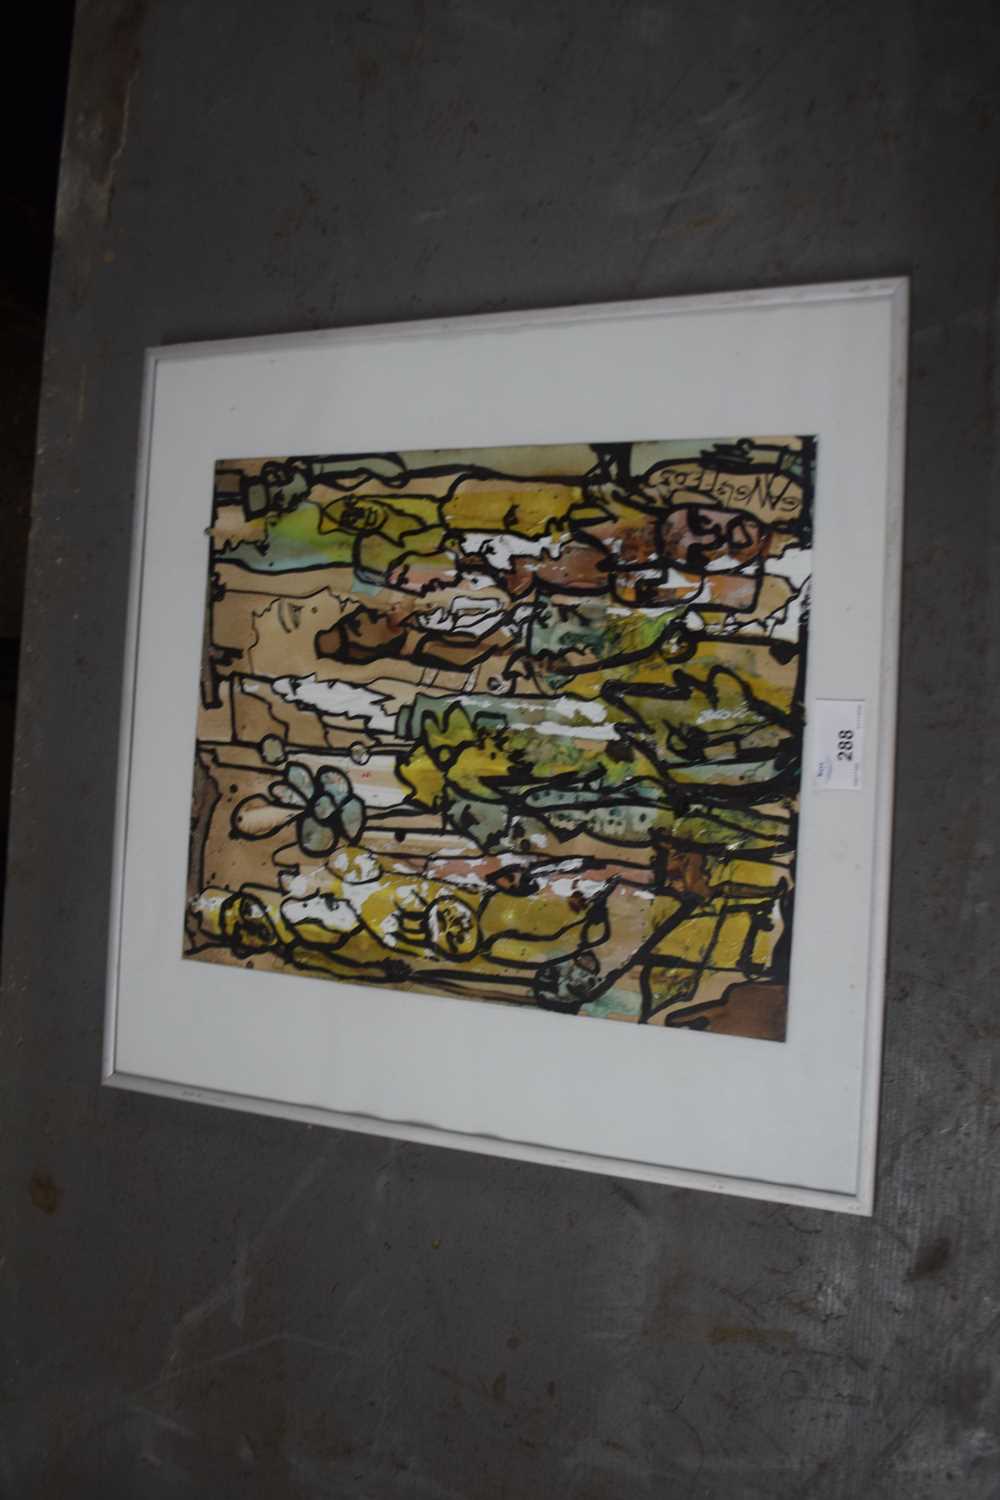 Abstract mixed media study signed Gangloff 05, framed and glazed